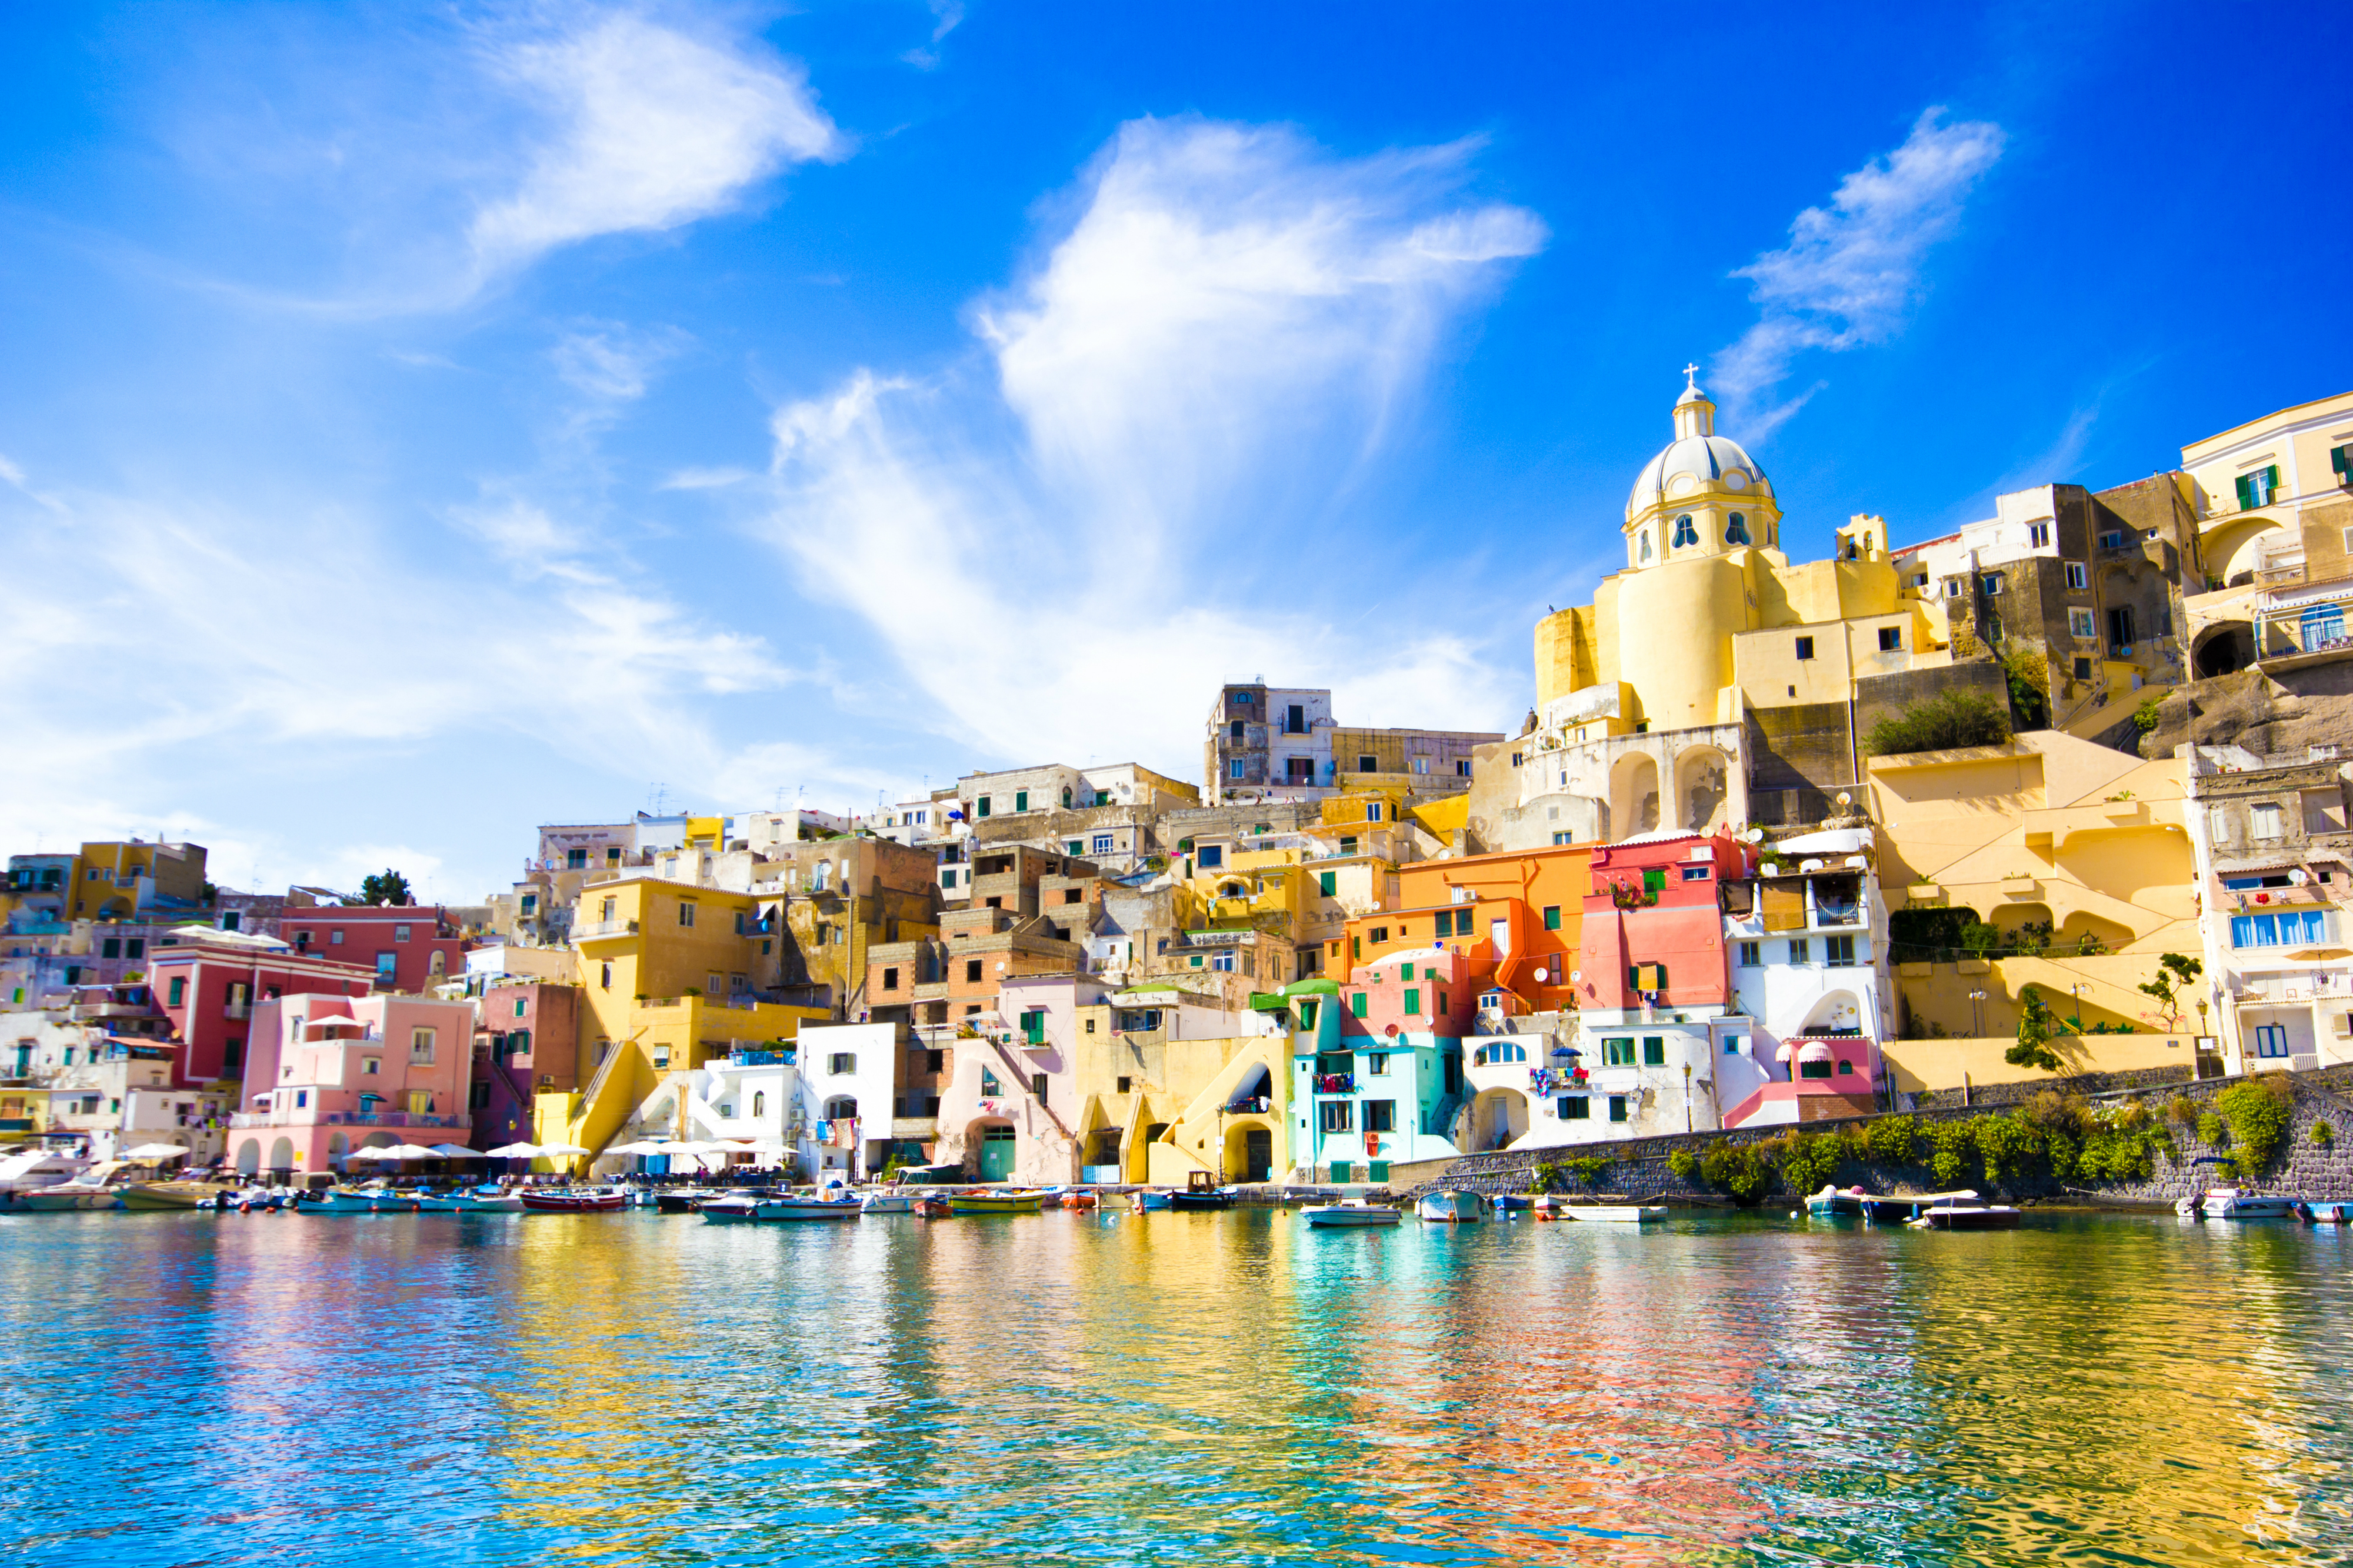 Deal Alert: Round-Trip Flights To Naples, Italy Are Going For $394